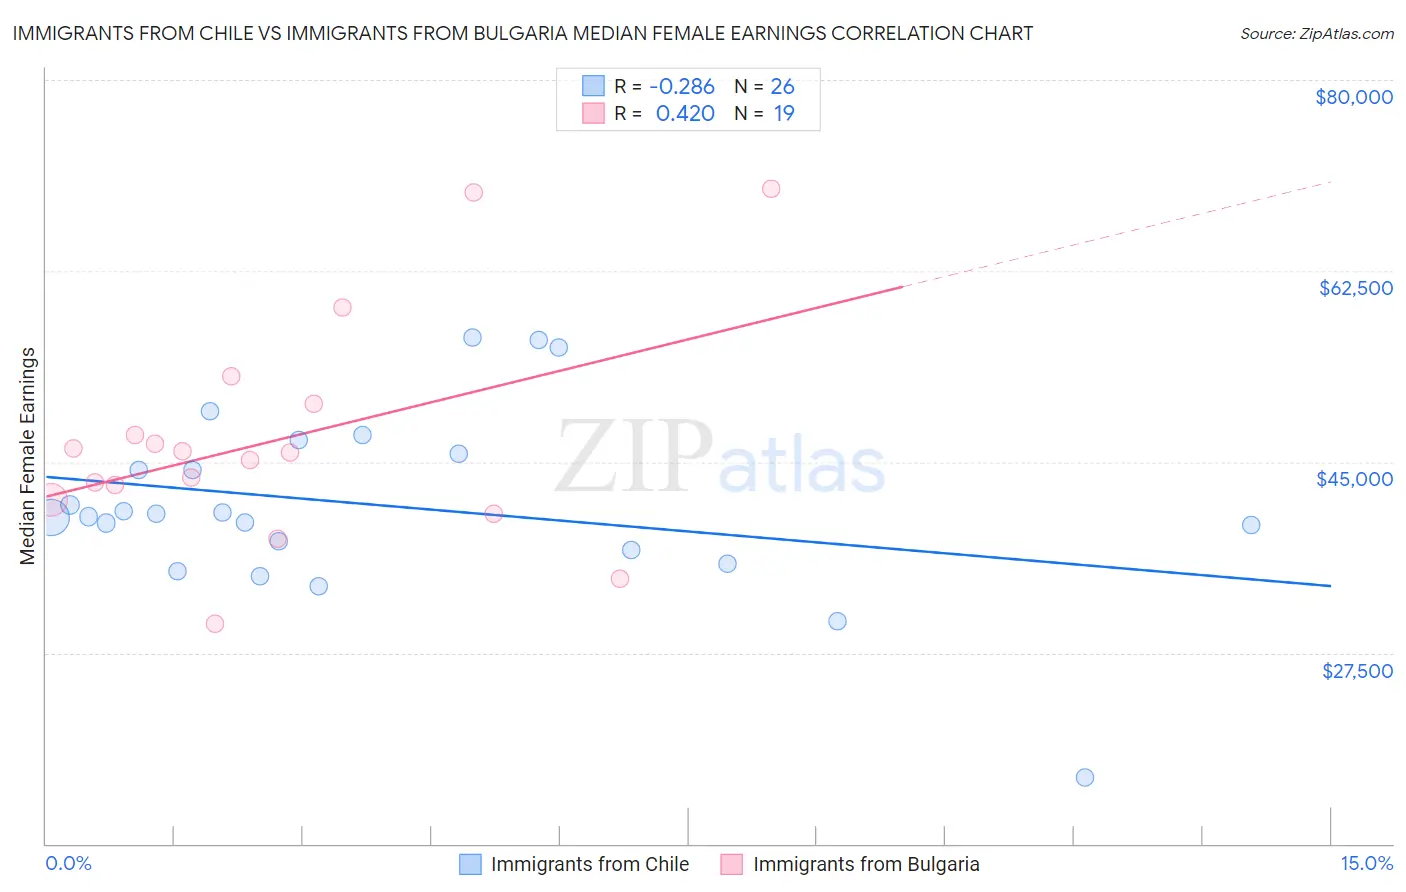 Immigrants from Chile vs Immigrants from Bulgaria Median Female Earnings